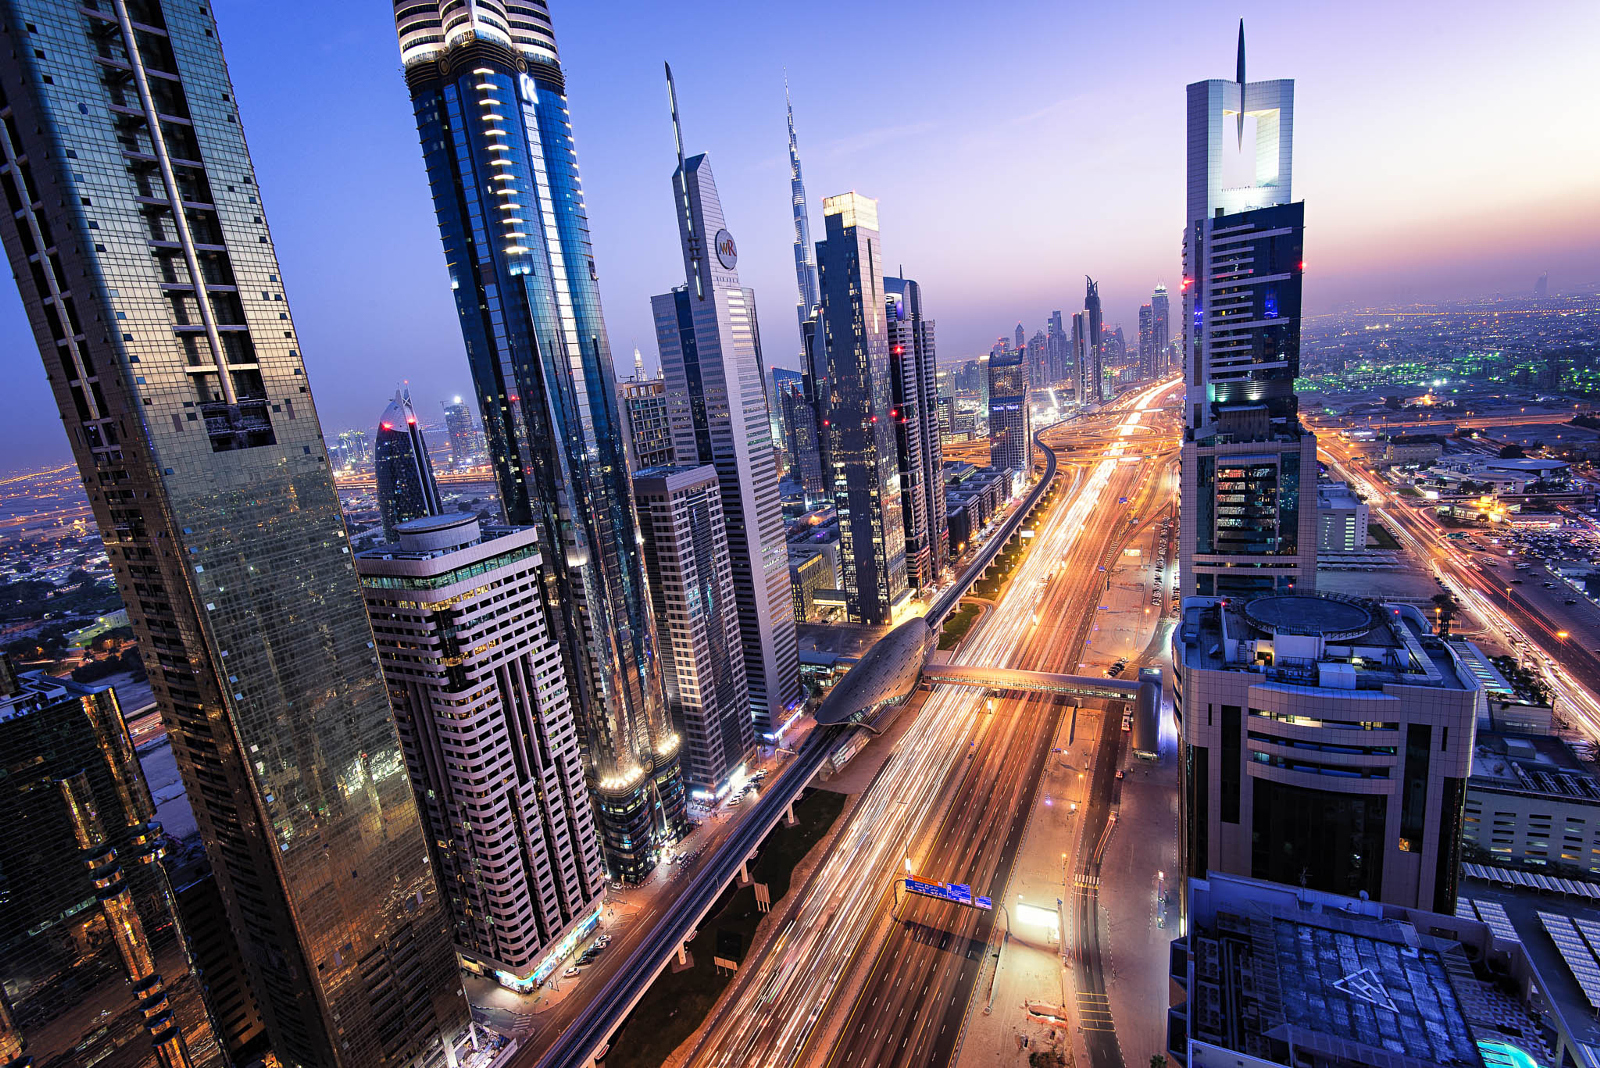 7 Expert Tips For Photographing Dubai from 7 Pro Photographers